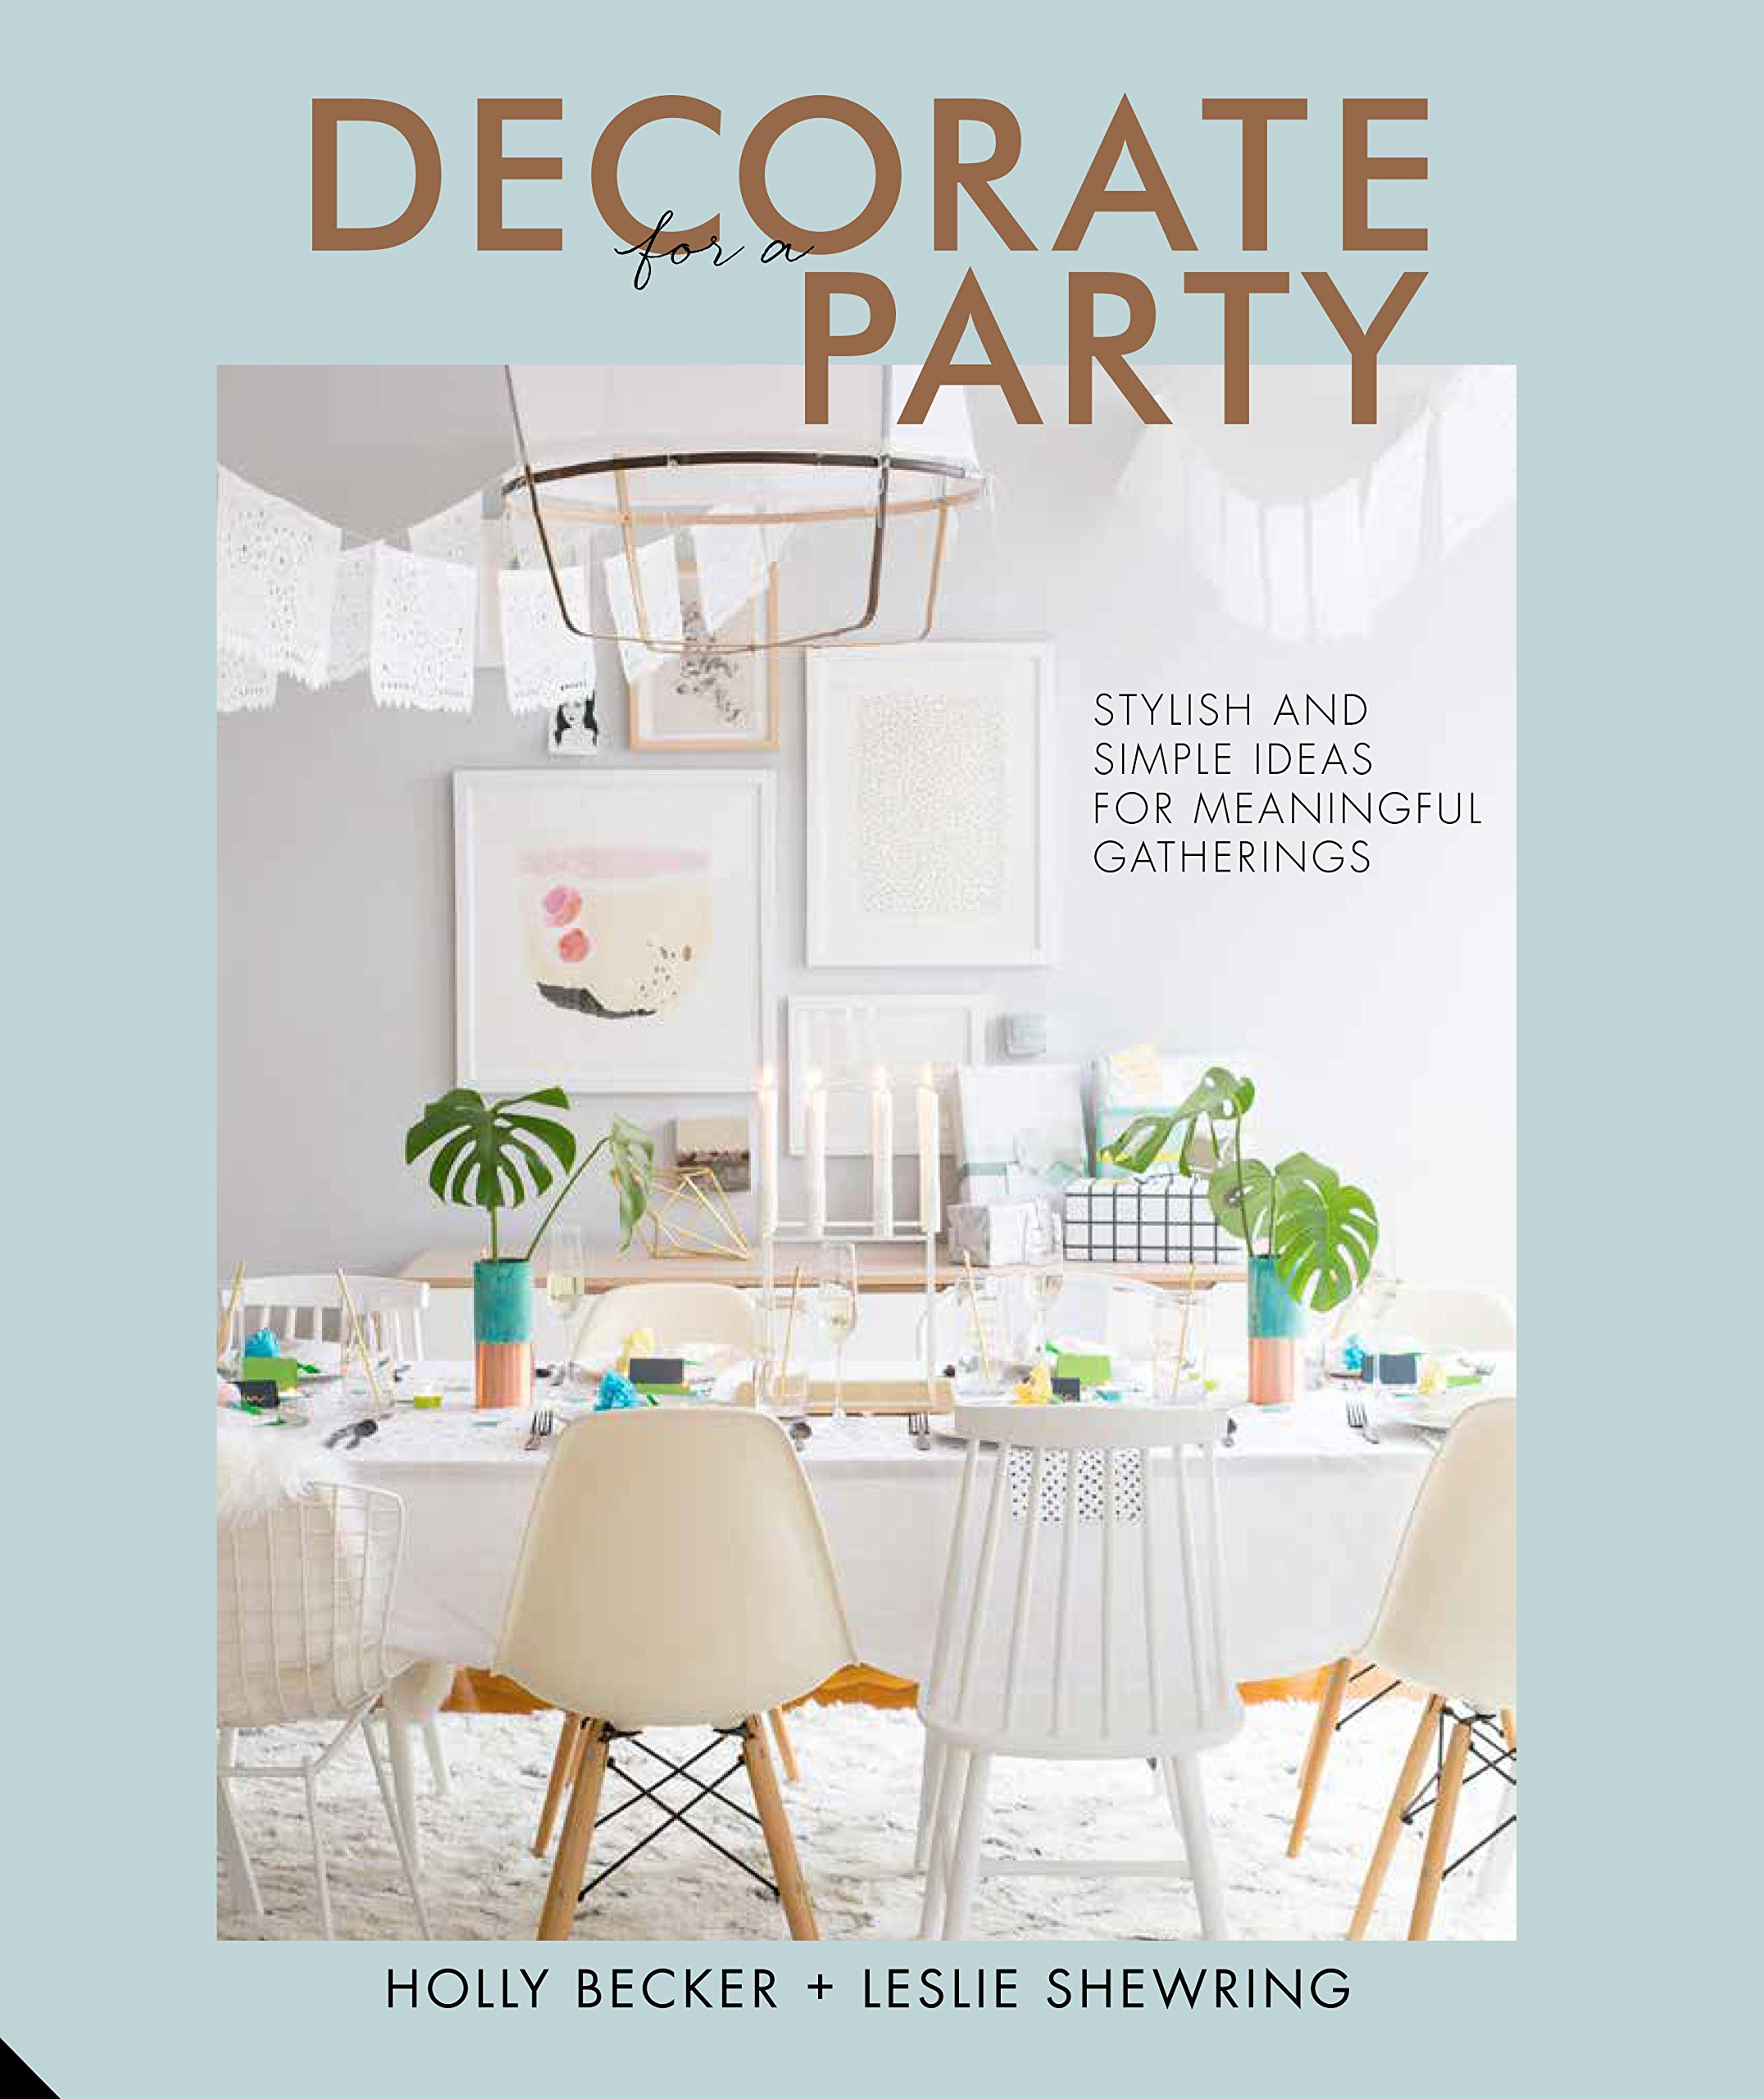 13 Lovely Vase Rentals Los Angeles 2024 free download vase rentals los angeles of amazon com decorate for a party stylish and simple ideas for in amazon com decorate for a party stylish and simple ideas for meaningful gatherings 9781910254295 h